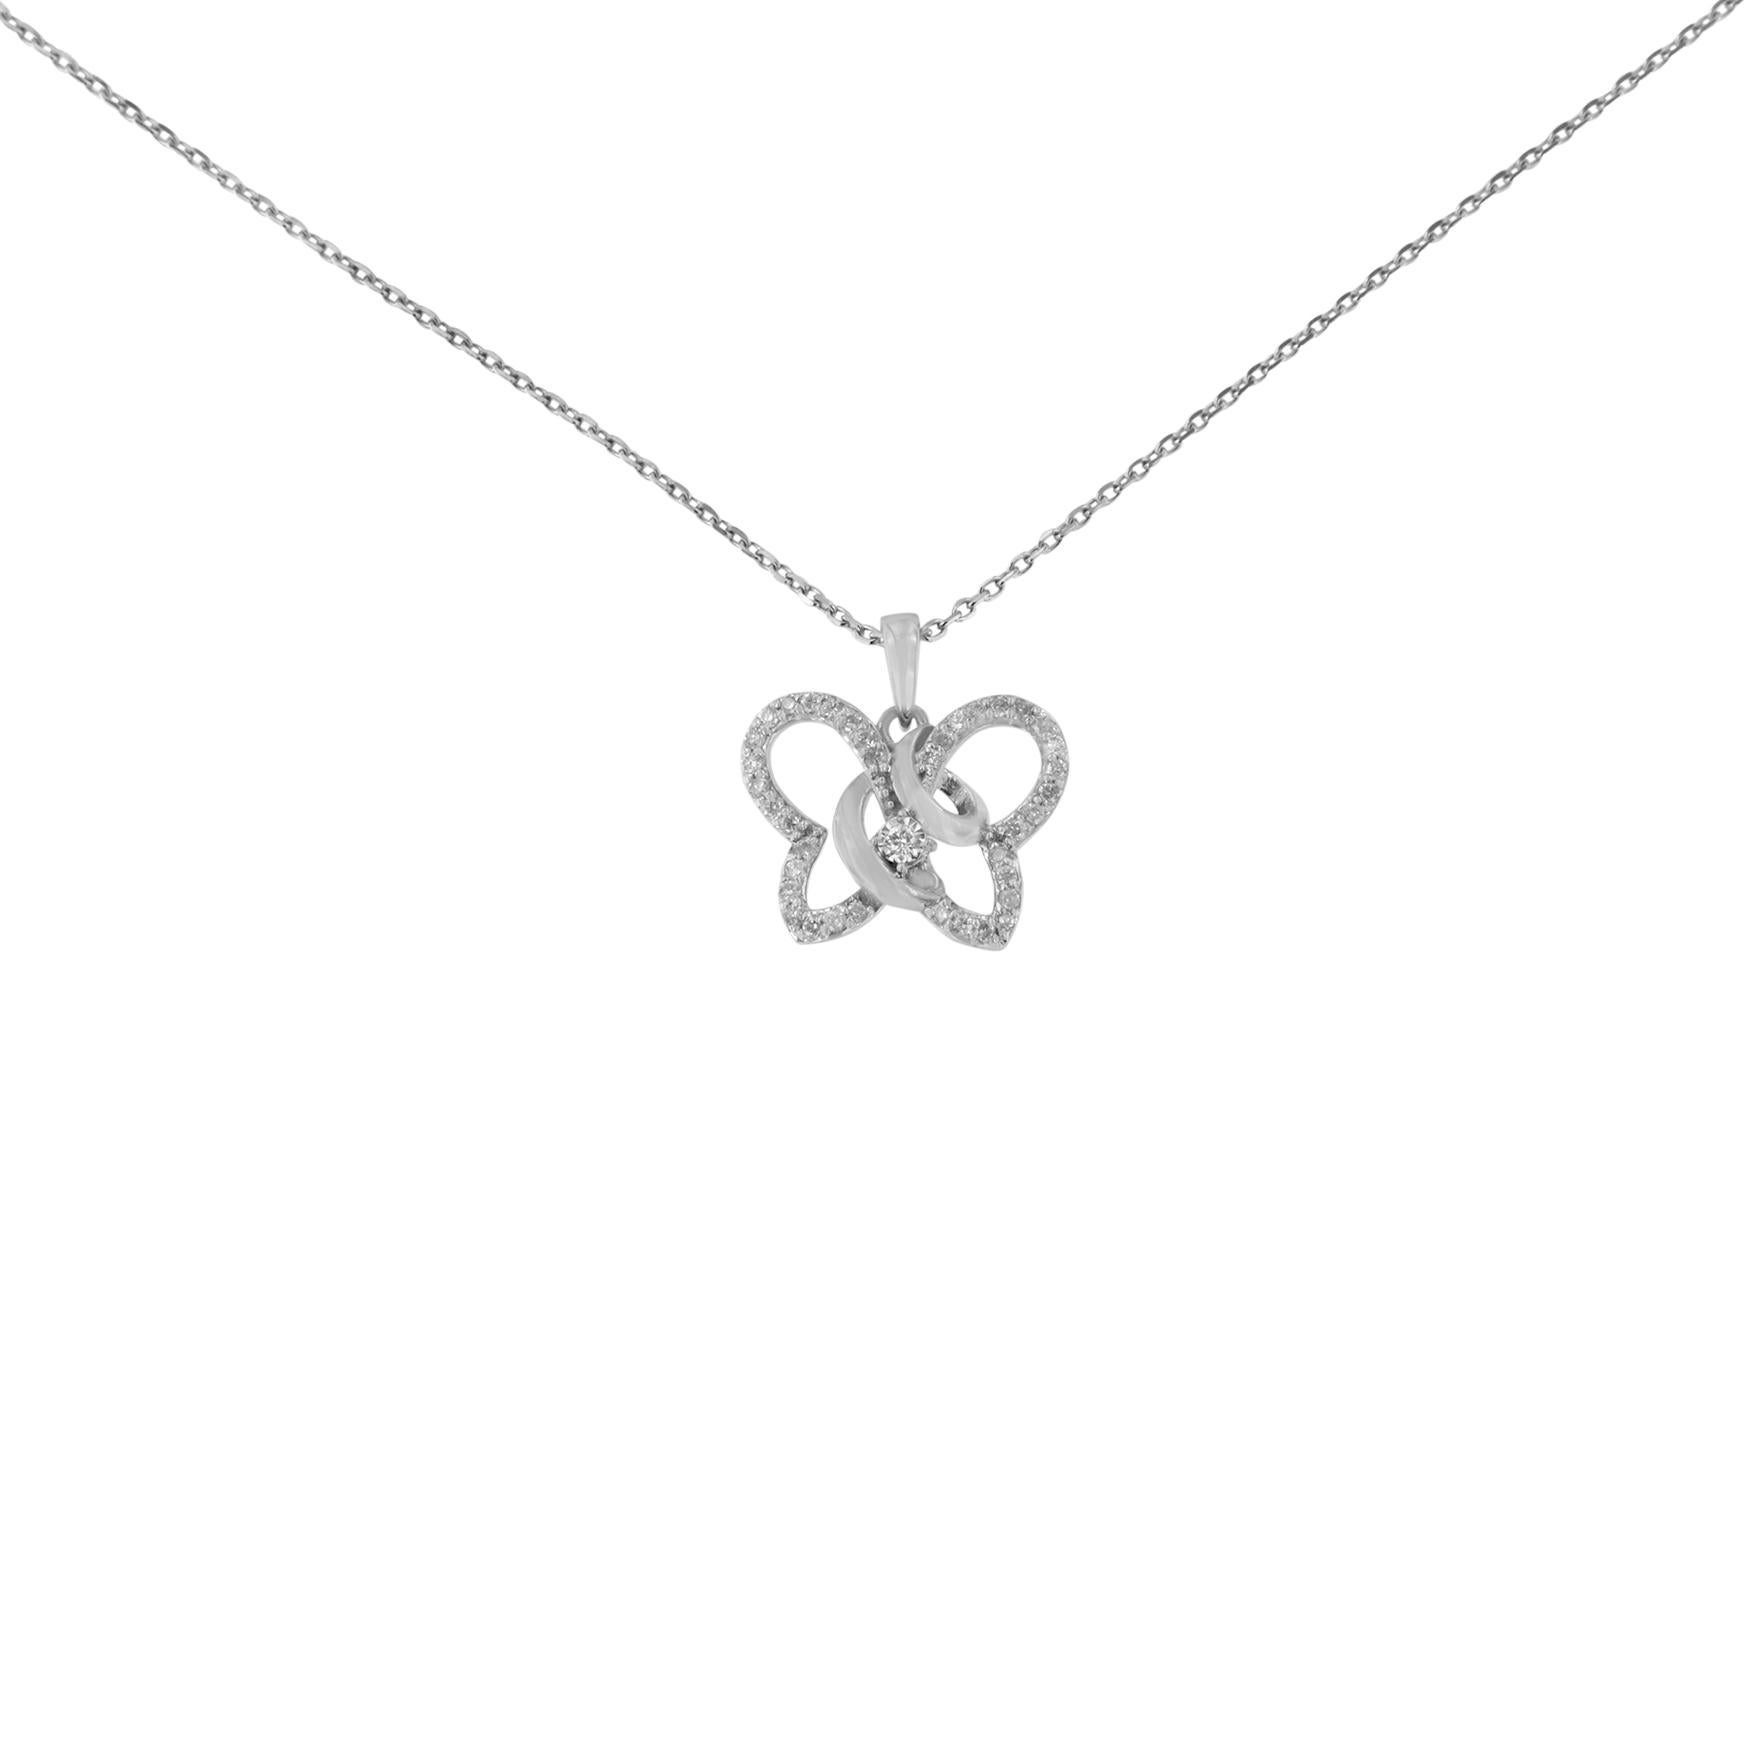 Take flight with this beautiful diamond butterfly pendant necklace. This elegant piece features 1/4 carat total weight of diamonds set in polished sterling silver. This chic and cute butterfly pendant makes for a perfect birthday, anniversary,